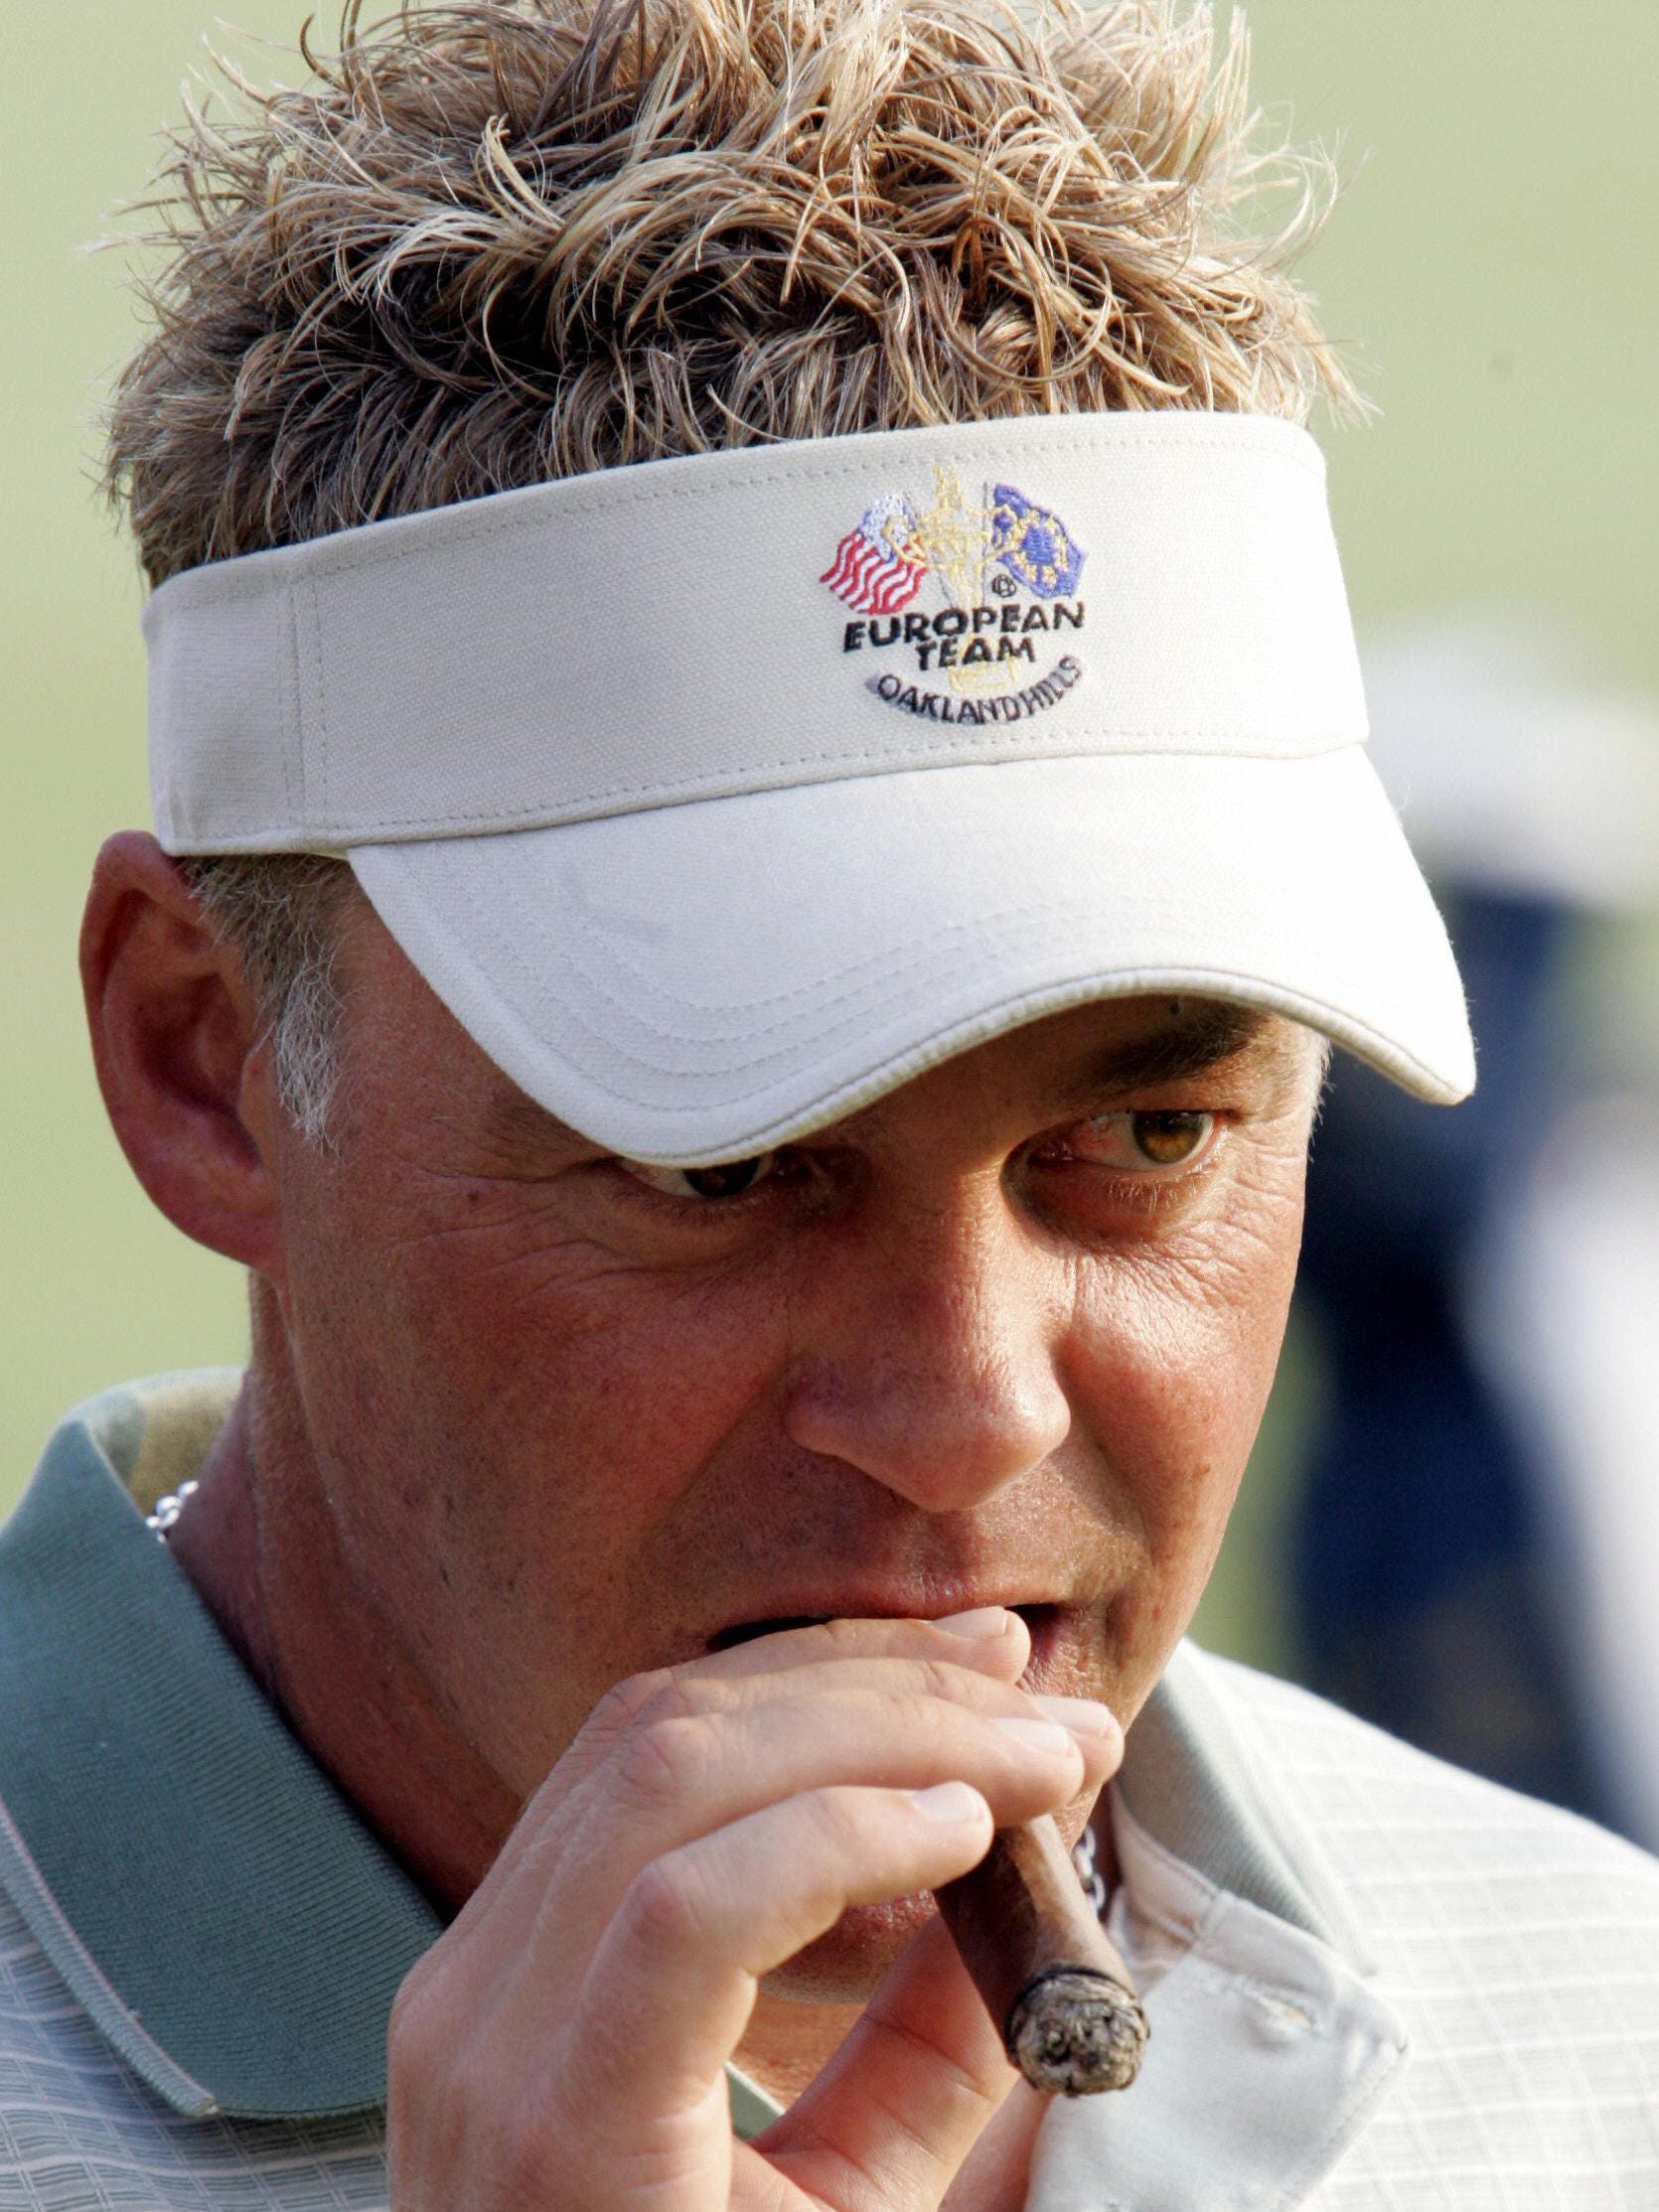 Team Europe's Darren Clarke takes a puff of his cigar during the 2004 Ryder Cup at Oakland Hills.